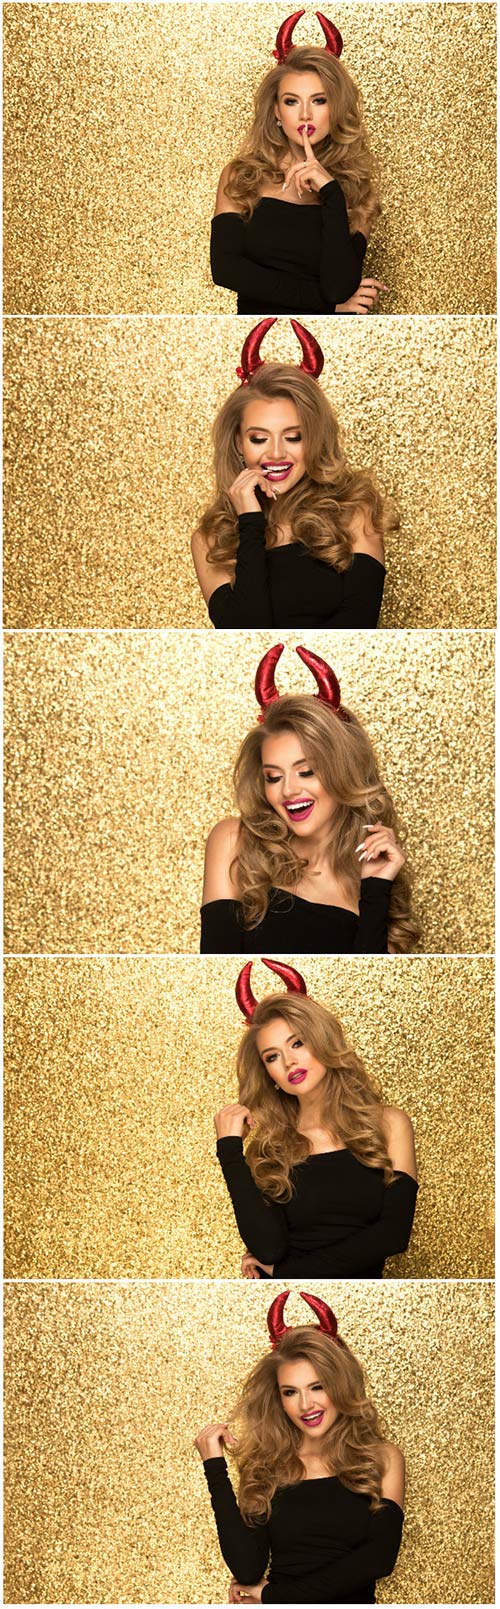 Girl with red horns on gold background stock photo